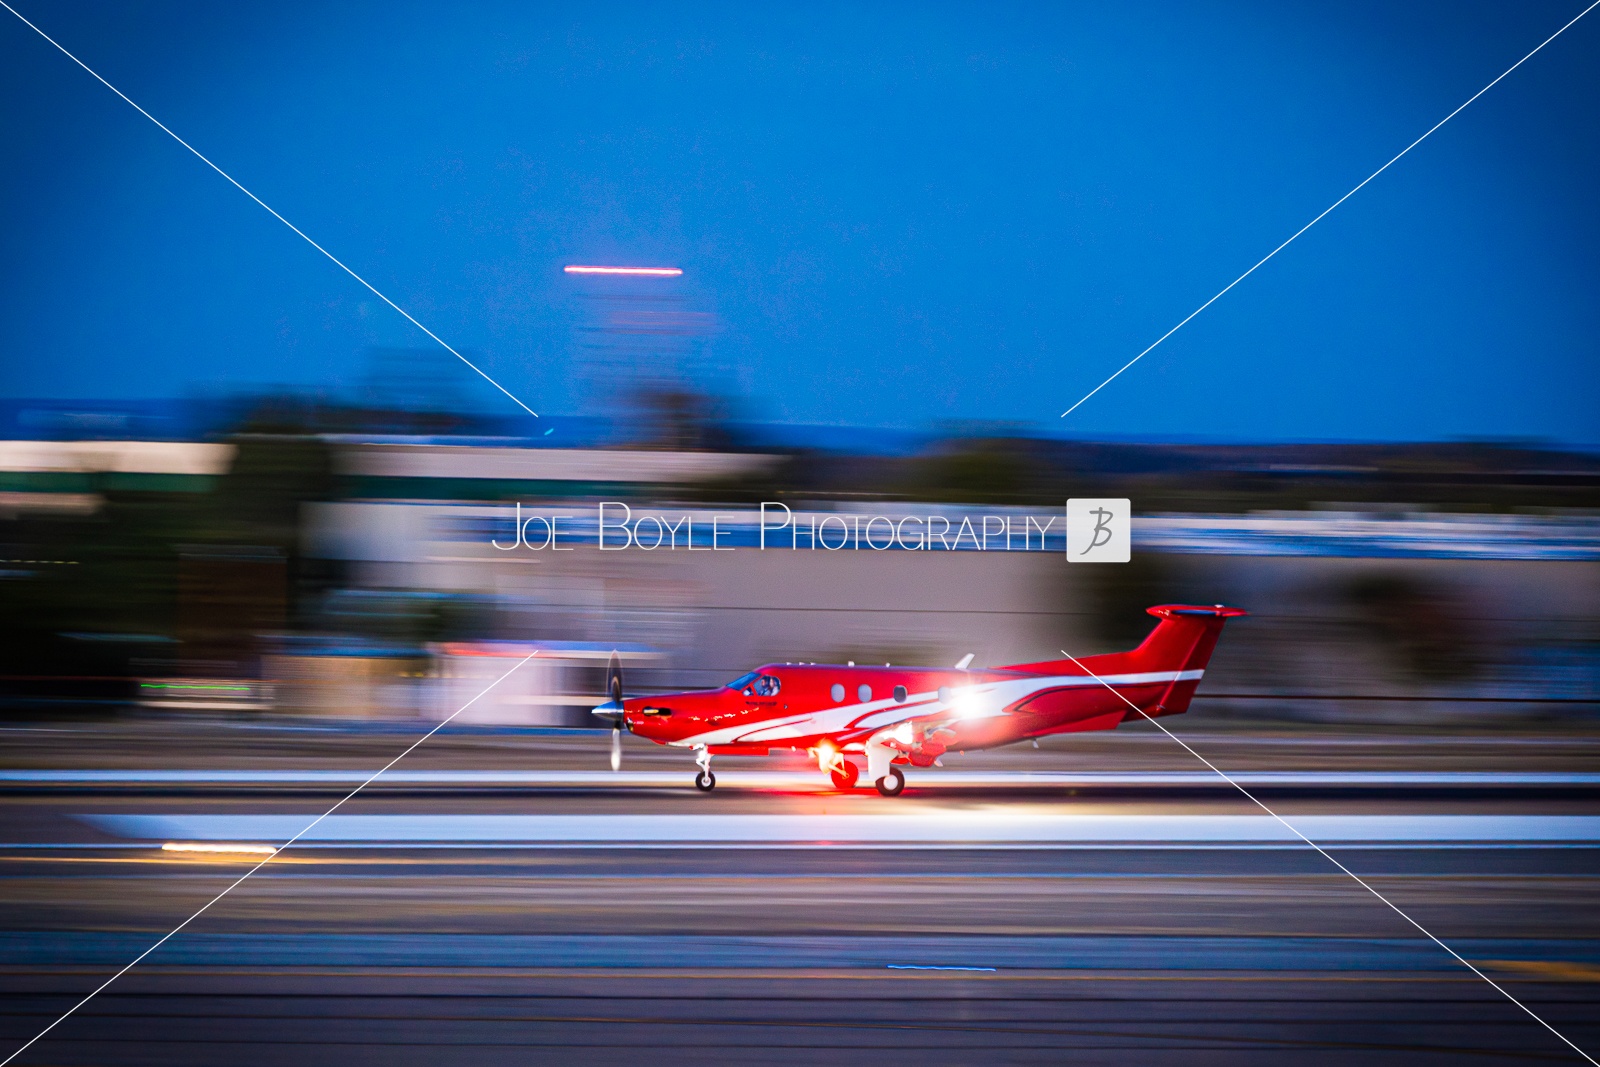  Airplane taking off at Night. It's a panning shot of a Pilatus aircraft 